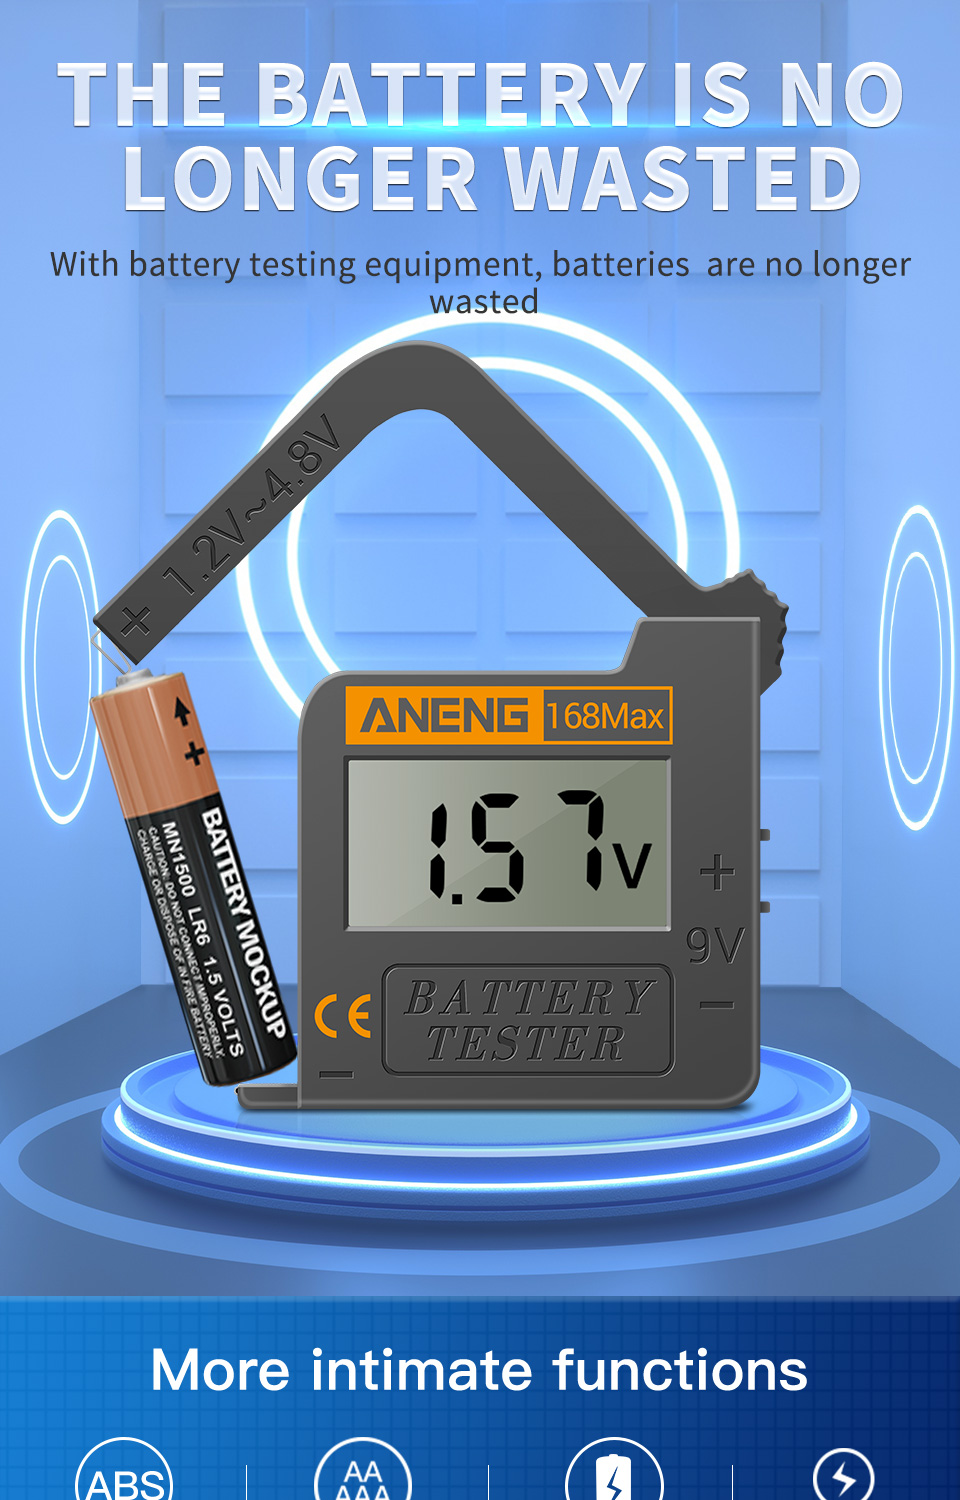 ANENG-168Max-Digital-Lithium-Battery-Capacity-Tester-Universal-Test-Checkered-Load-Analyzer-Display--1709622-2